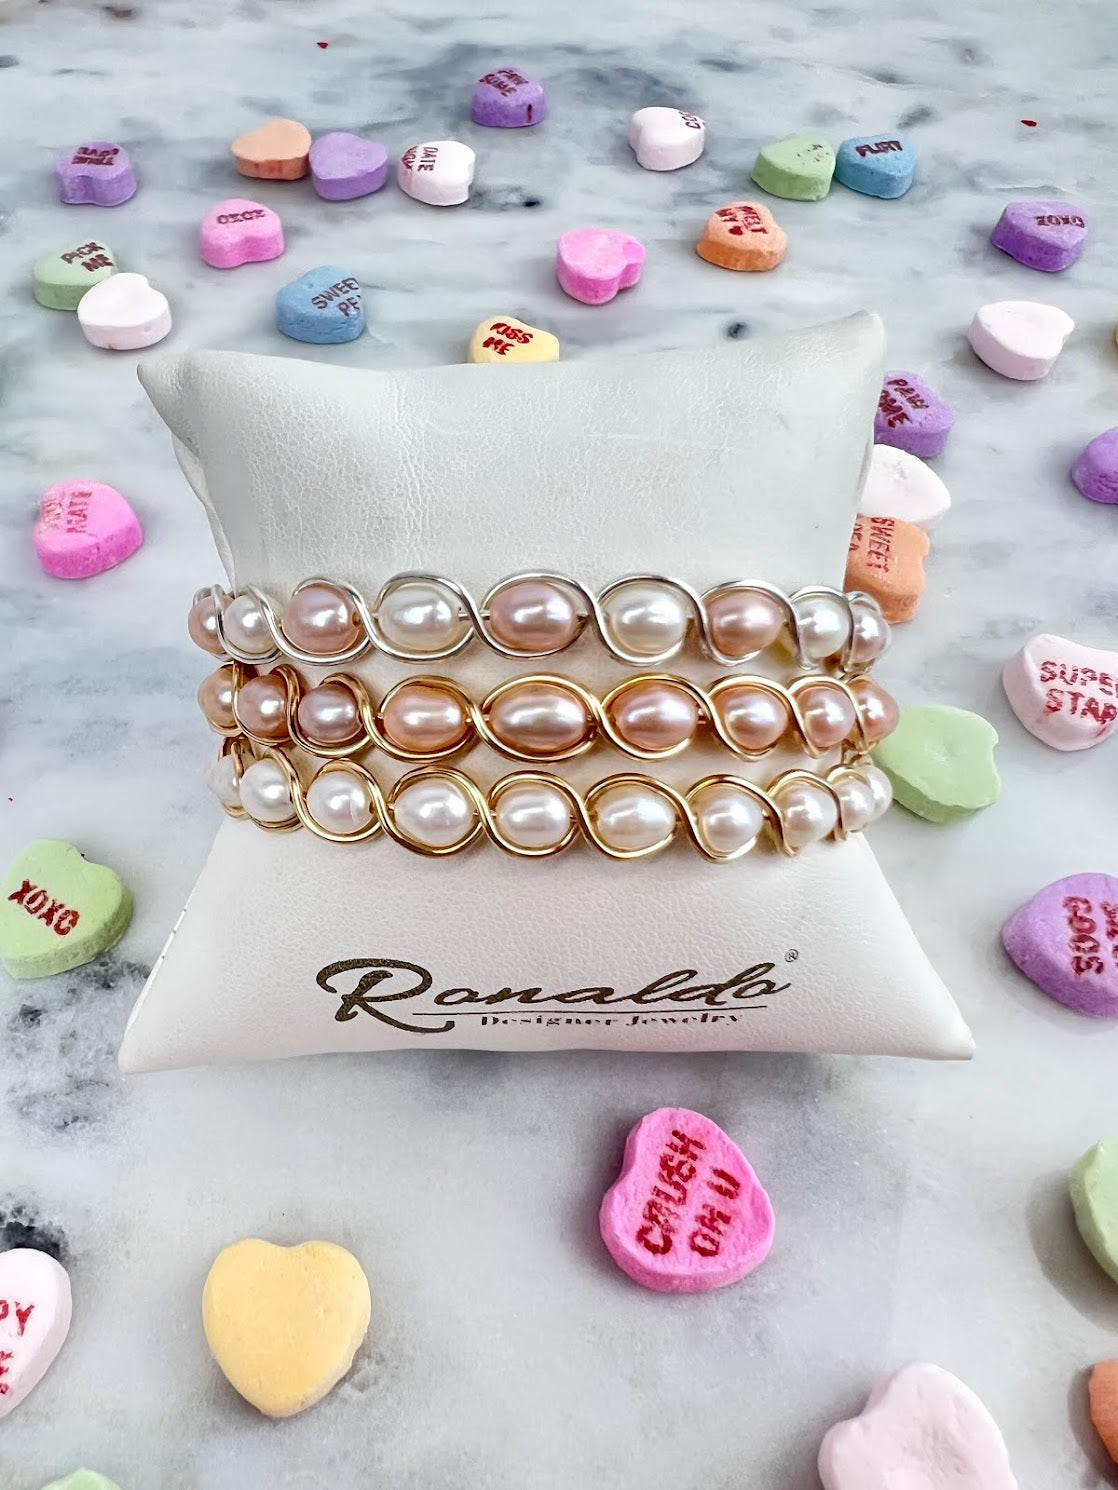 Ronaldo Natural Charm Gold with Pink Pearls Bracelets in  at Wrapsody